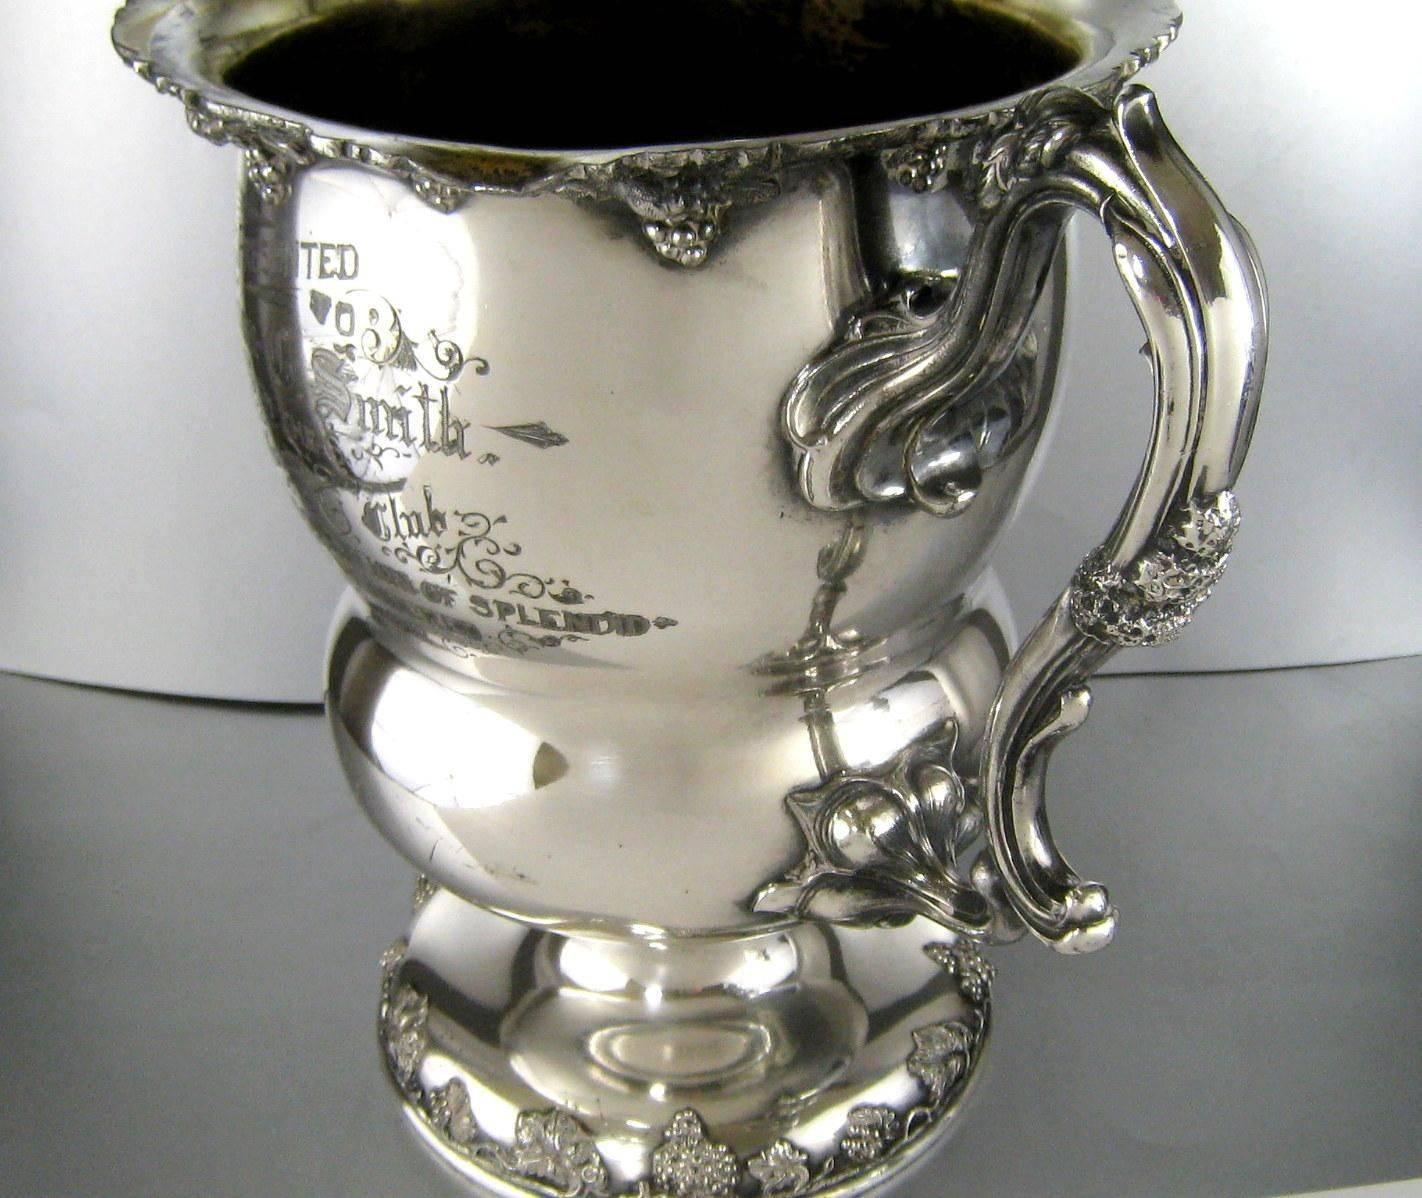 Wonderful and large antique silver plate trophy wine cooler. The trophy is decorated with a dimensional grape and vine around its rim and foot. The handles are designed as stylized grape vines. Marked on the bottom as made by the Barbour Silver Co.